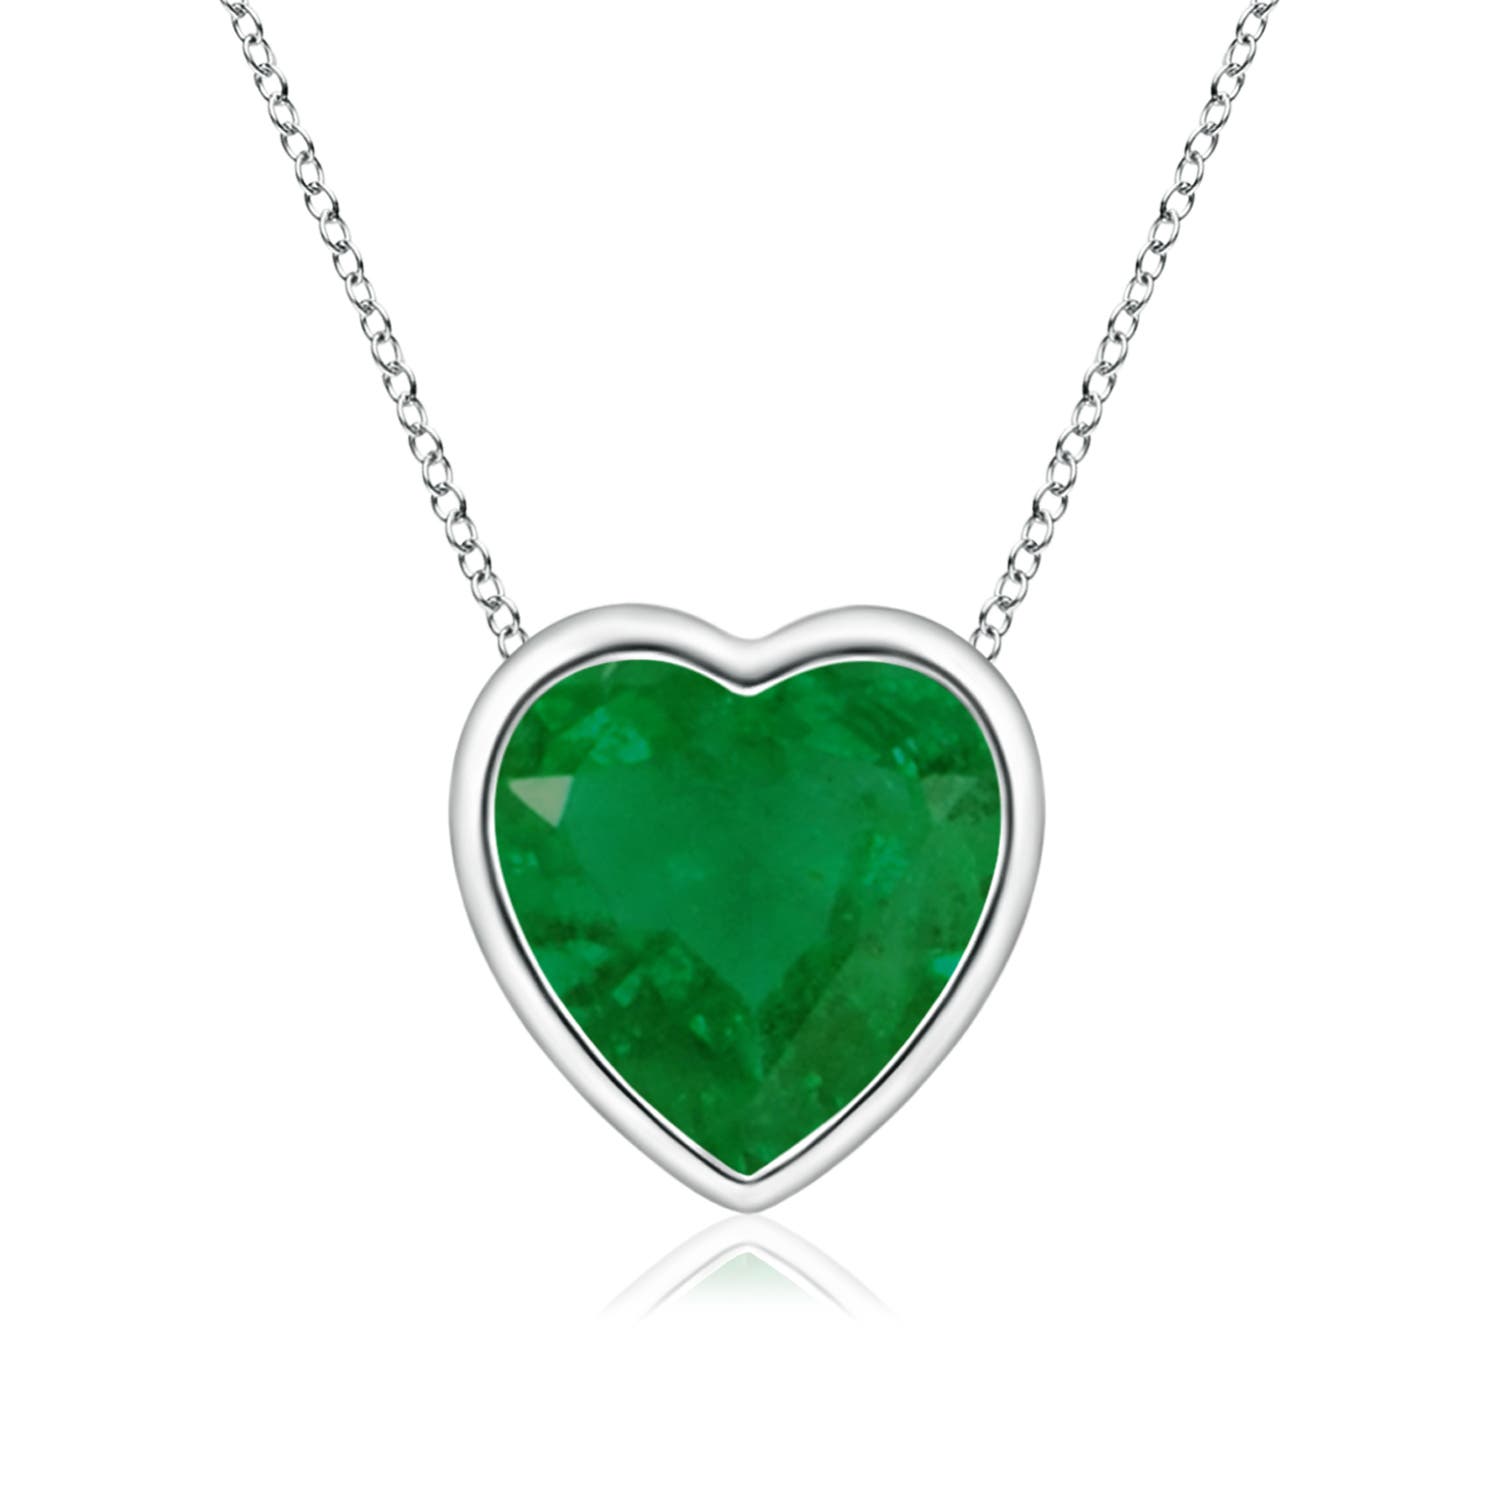 A - Emerald / 0.6 CT / 14 KT White Gold